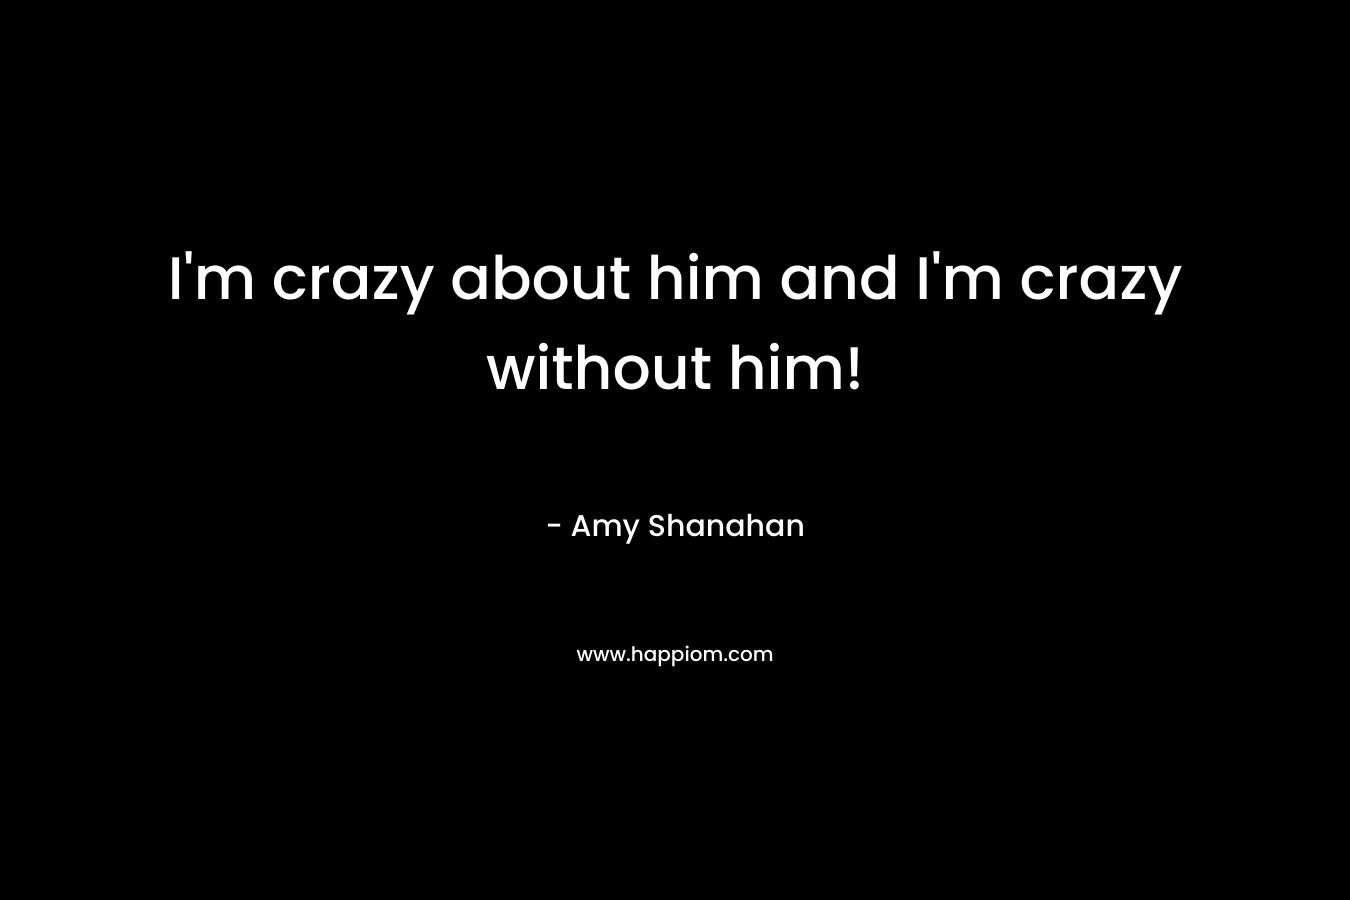 I'm crazy about him and I'm crazy without him!